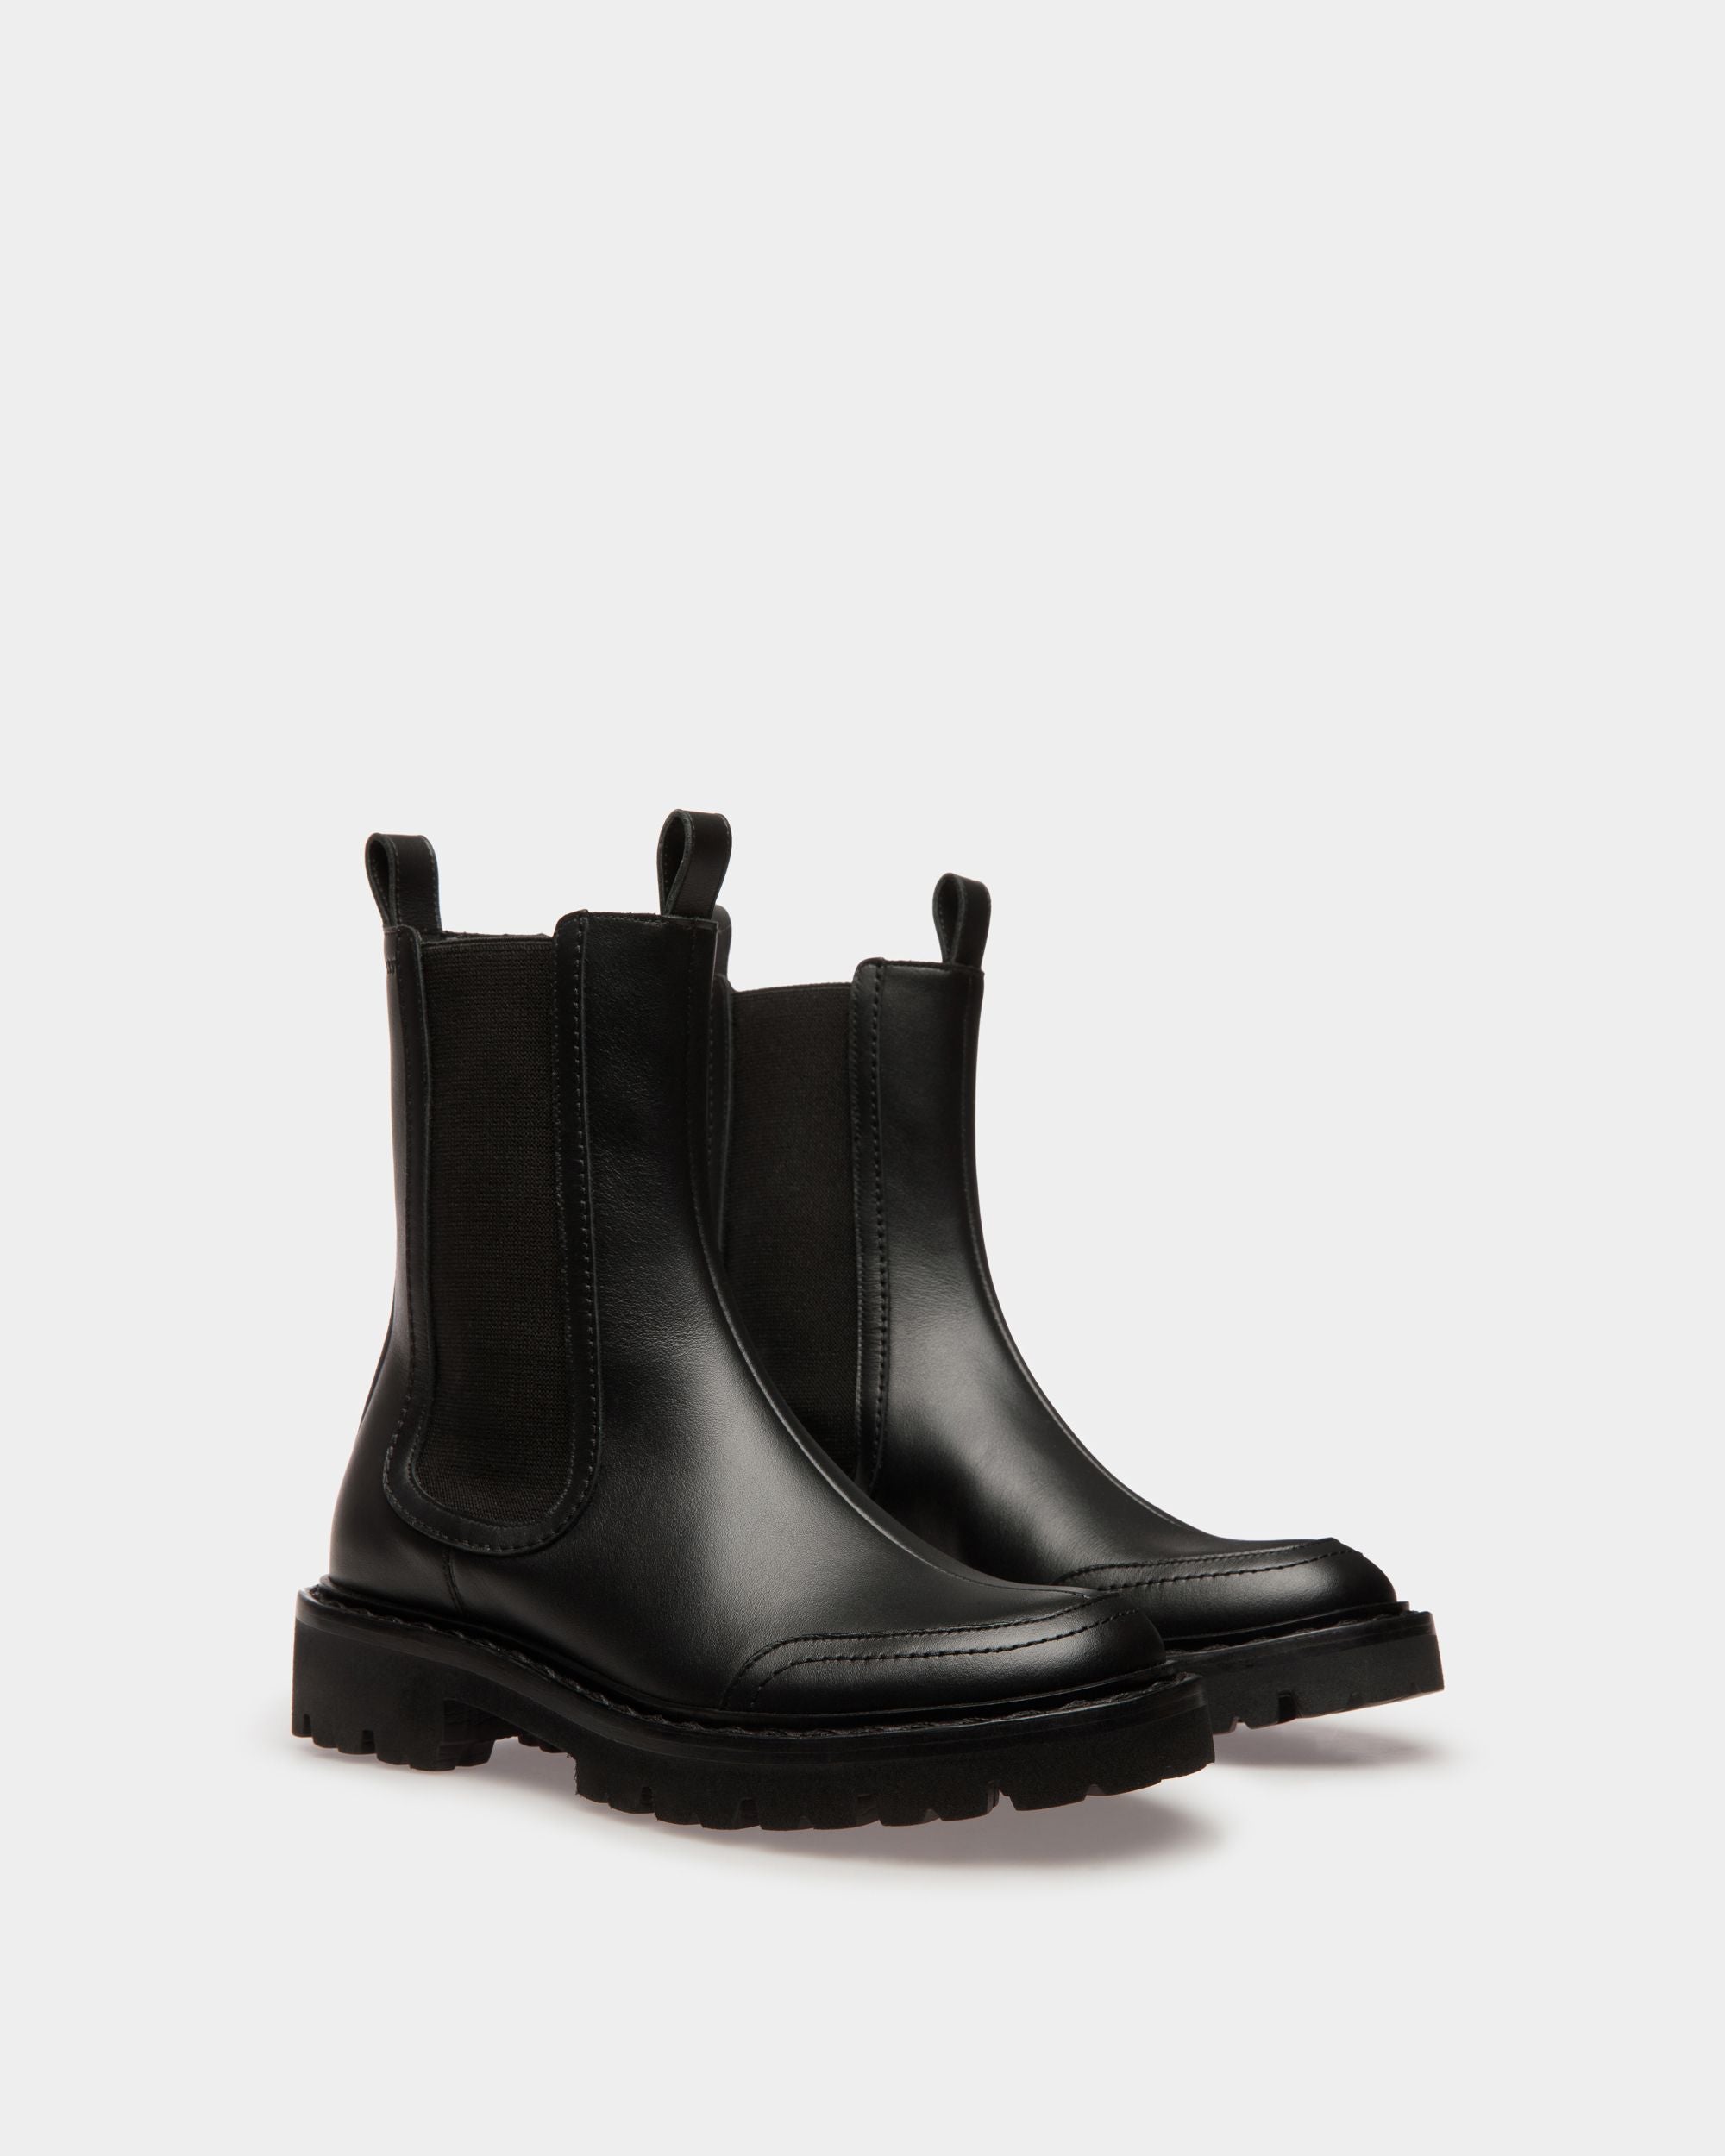 Nalyna | Women's Boots | Black Leather | Bally | Still Life 3/4 Front